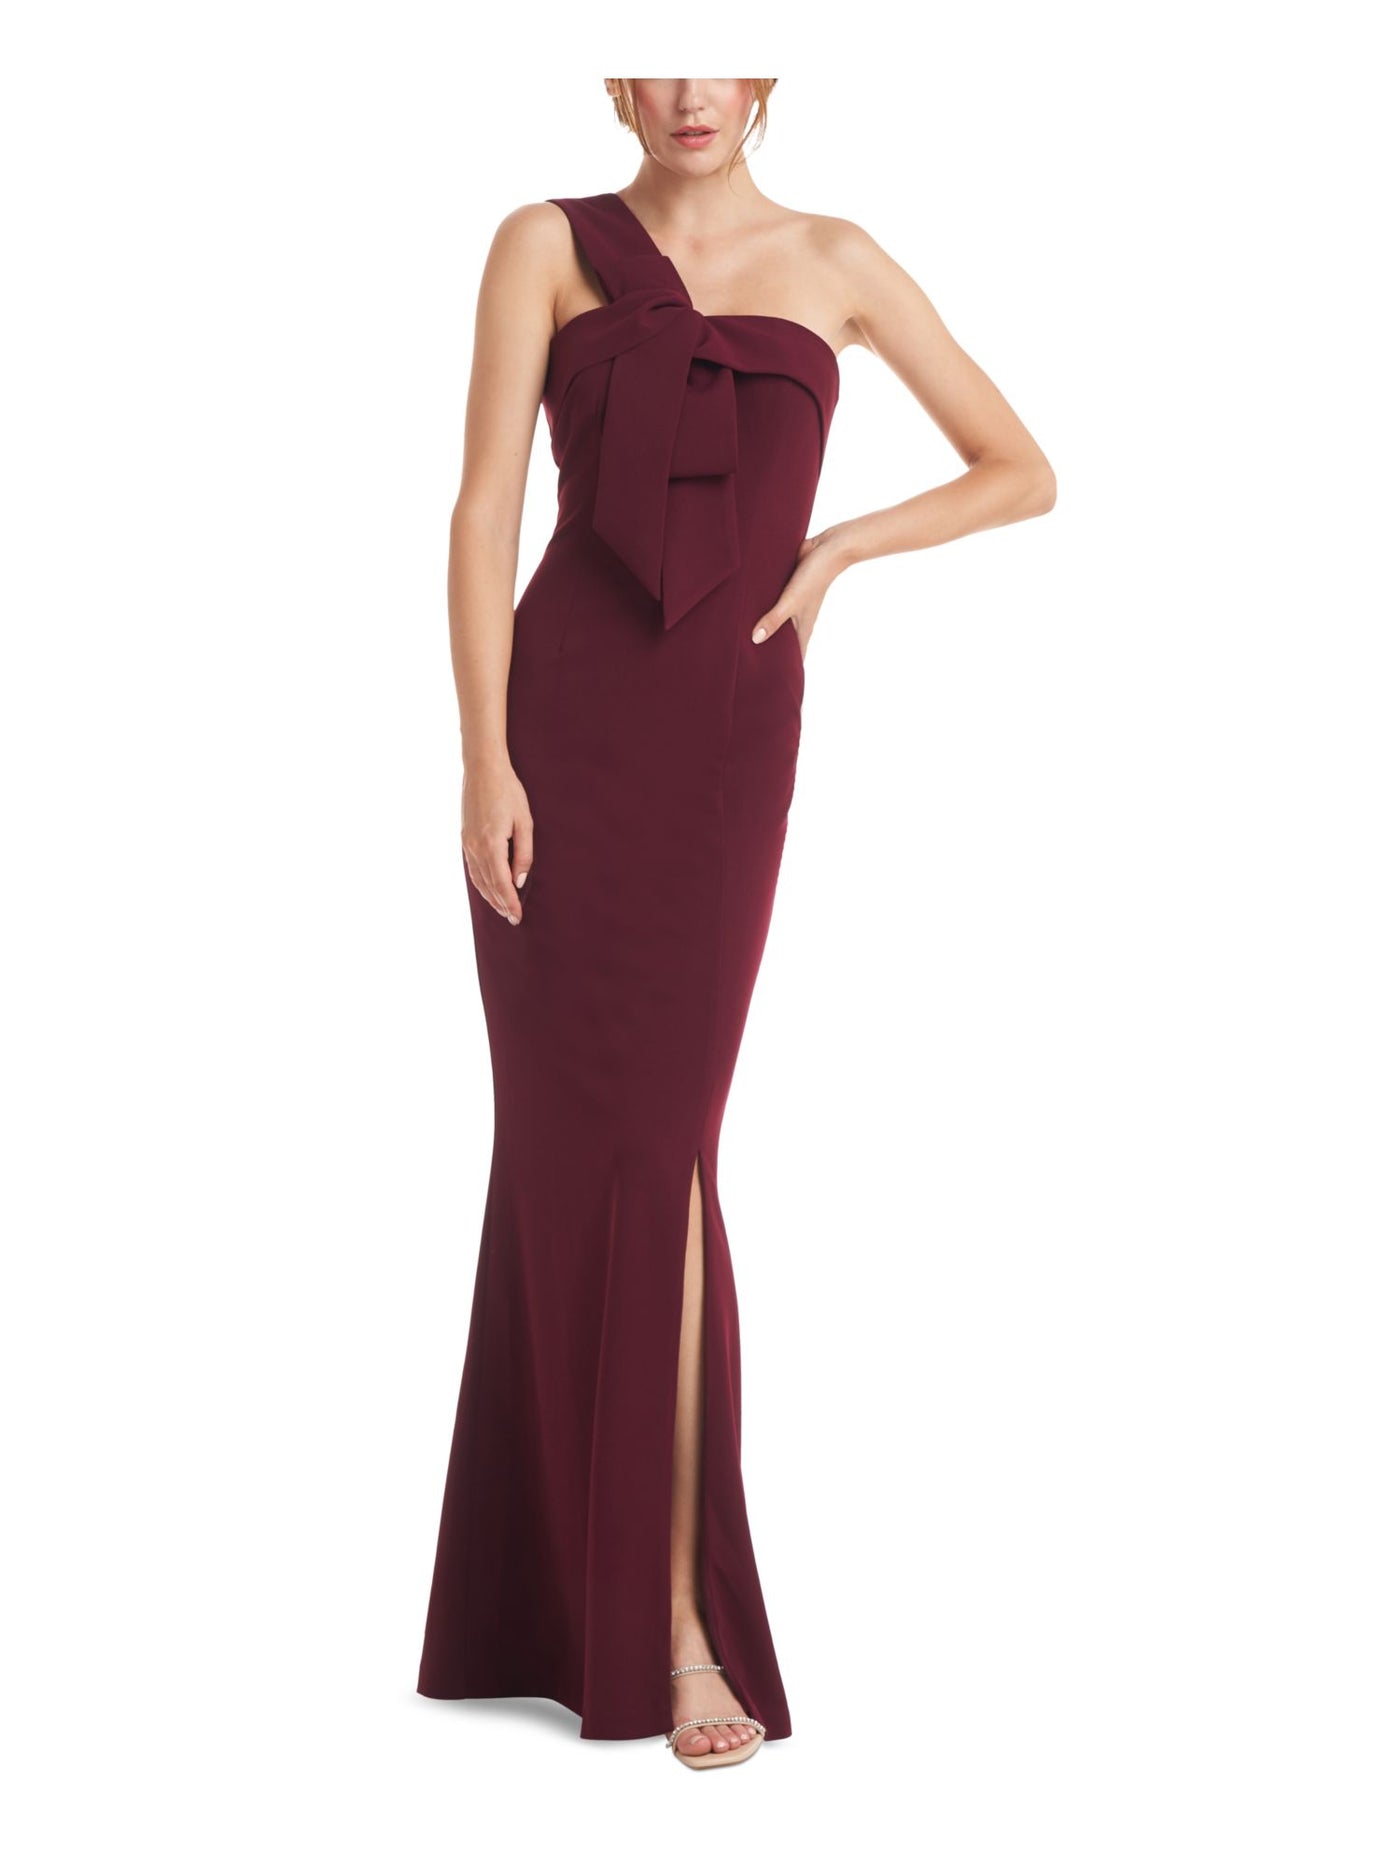 JS COLLECTION Womens Stretch Slitted Zippered Fold Over Trim Bow Detail Sleeveless Asymmetrical Neckline Full-Length Formal Gown Dress